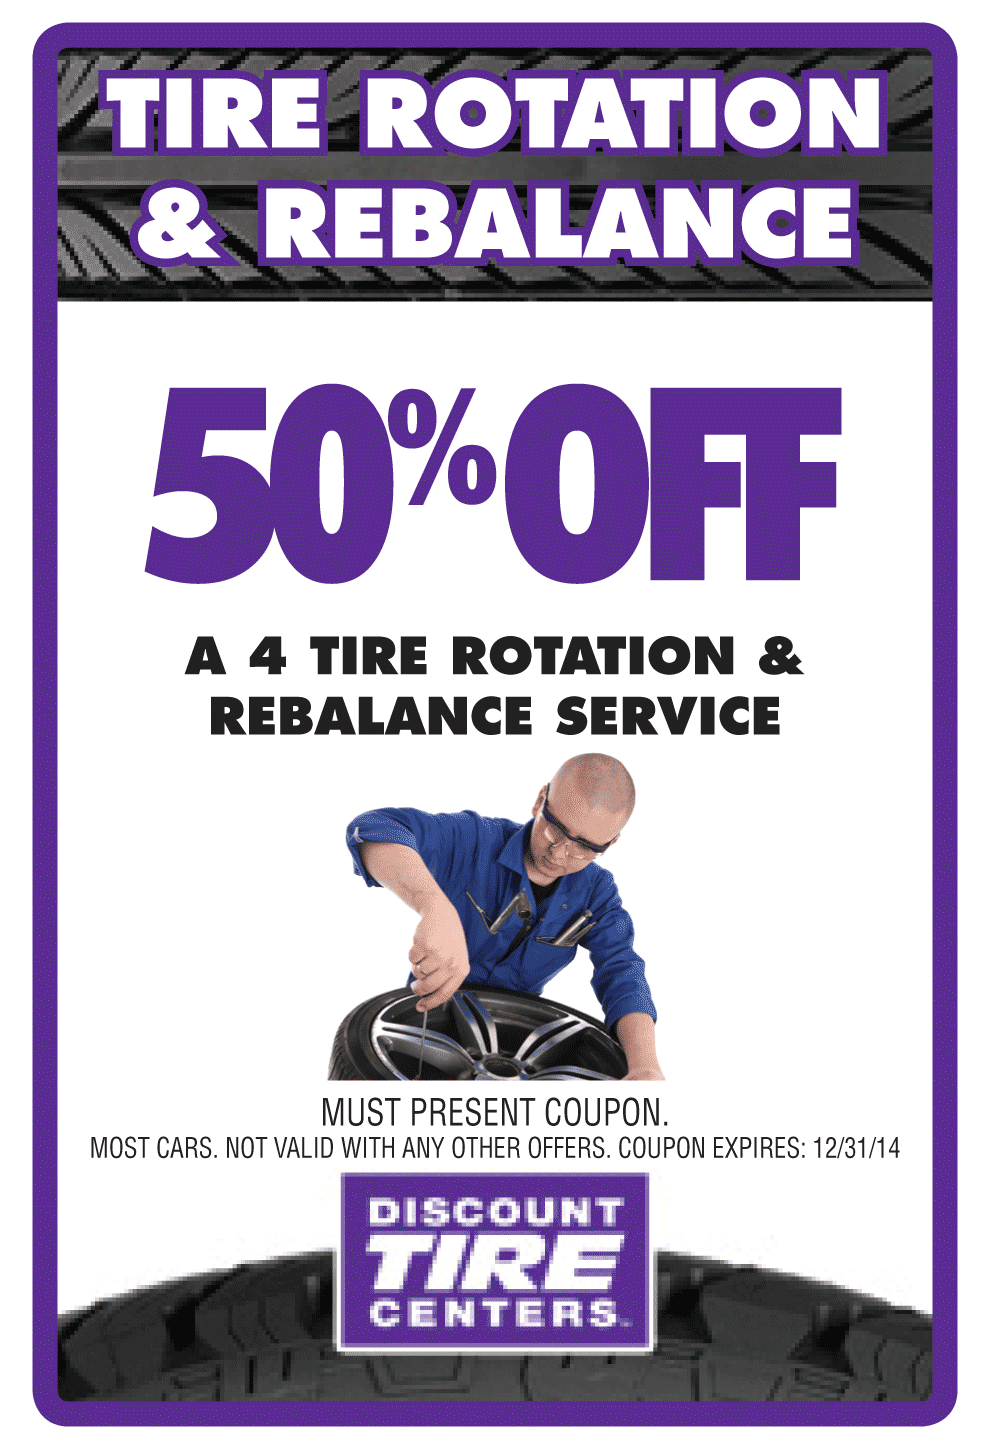 Discount Tire Centers recommends you rotate and re-balance your tires regularly.  take advantage of this special to save you money today!<br>
<a 
	class="btn-purple"
        style="font-weight:bold;"
	href="https://www.discounttirecenters.com/appointment.php" 
	target="_blank" 
	title="Make Appointment"
>MAKE AN APPOINTMENT
</a>
